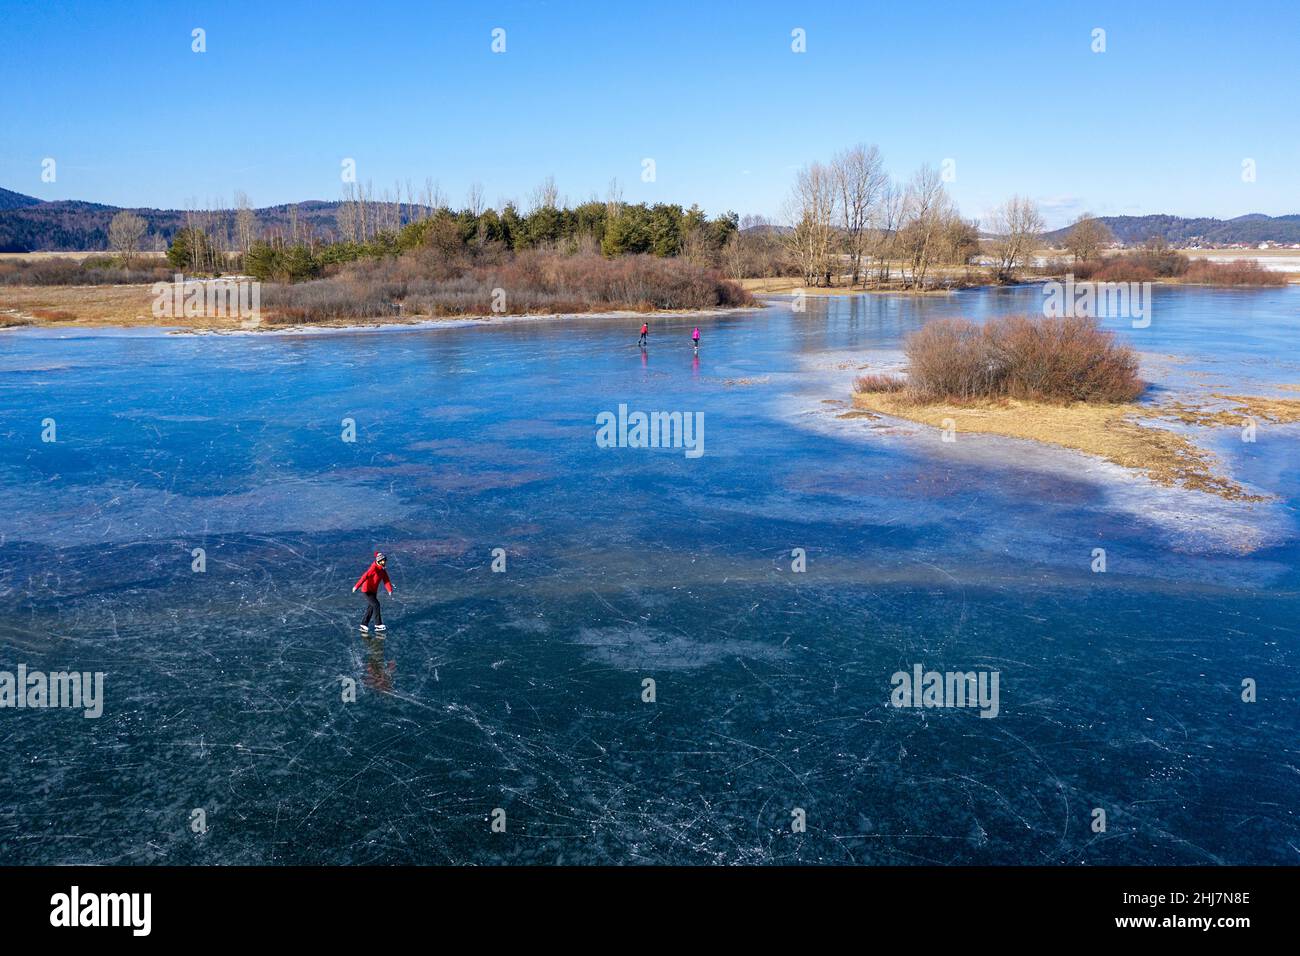 Aerial view of a woman ice skating on frozen intermittent lake Cerknica, Slovenia on a sunny day Stock Photo